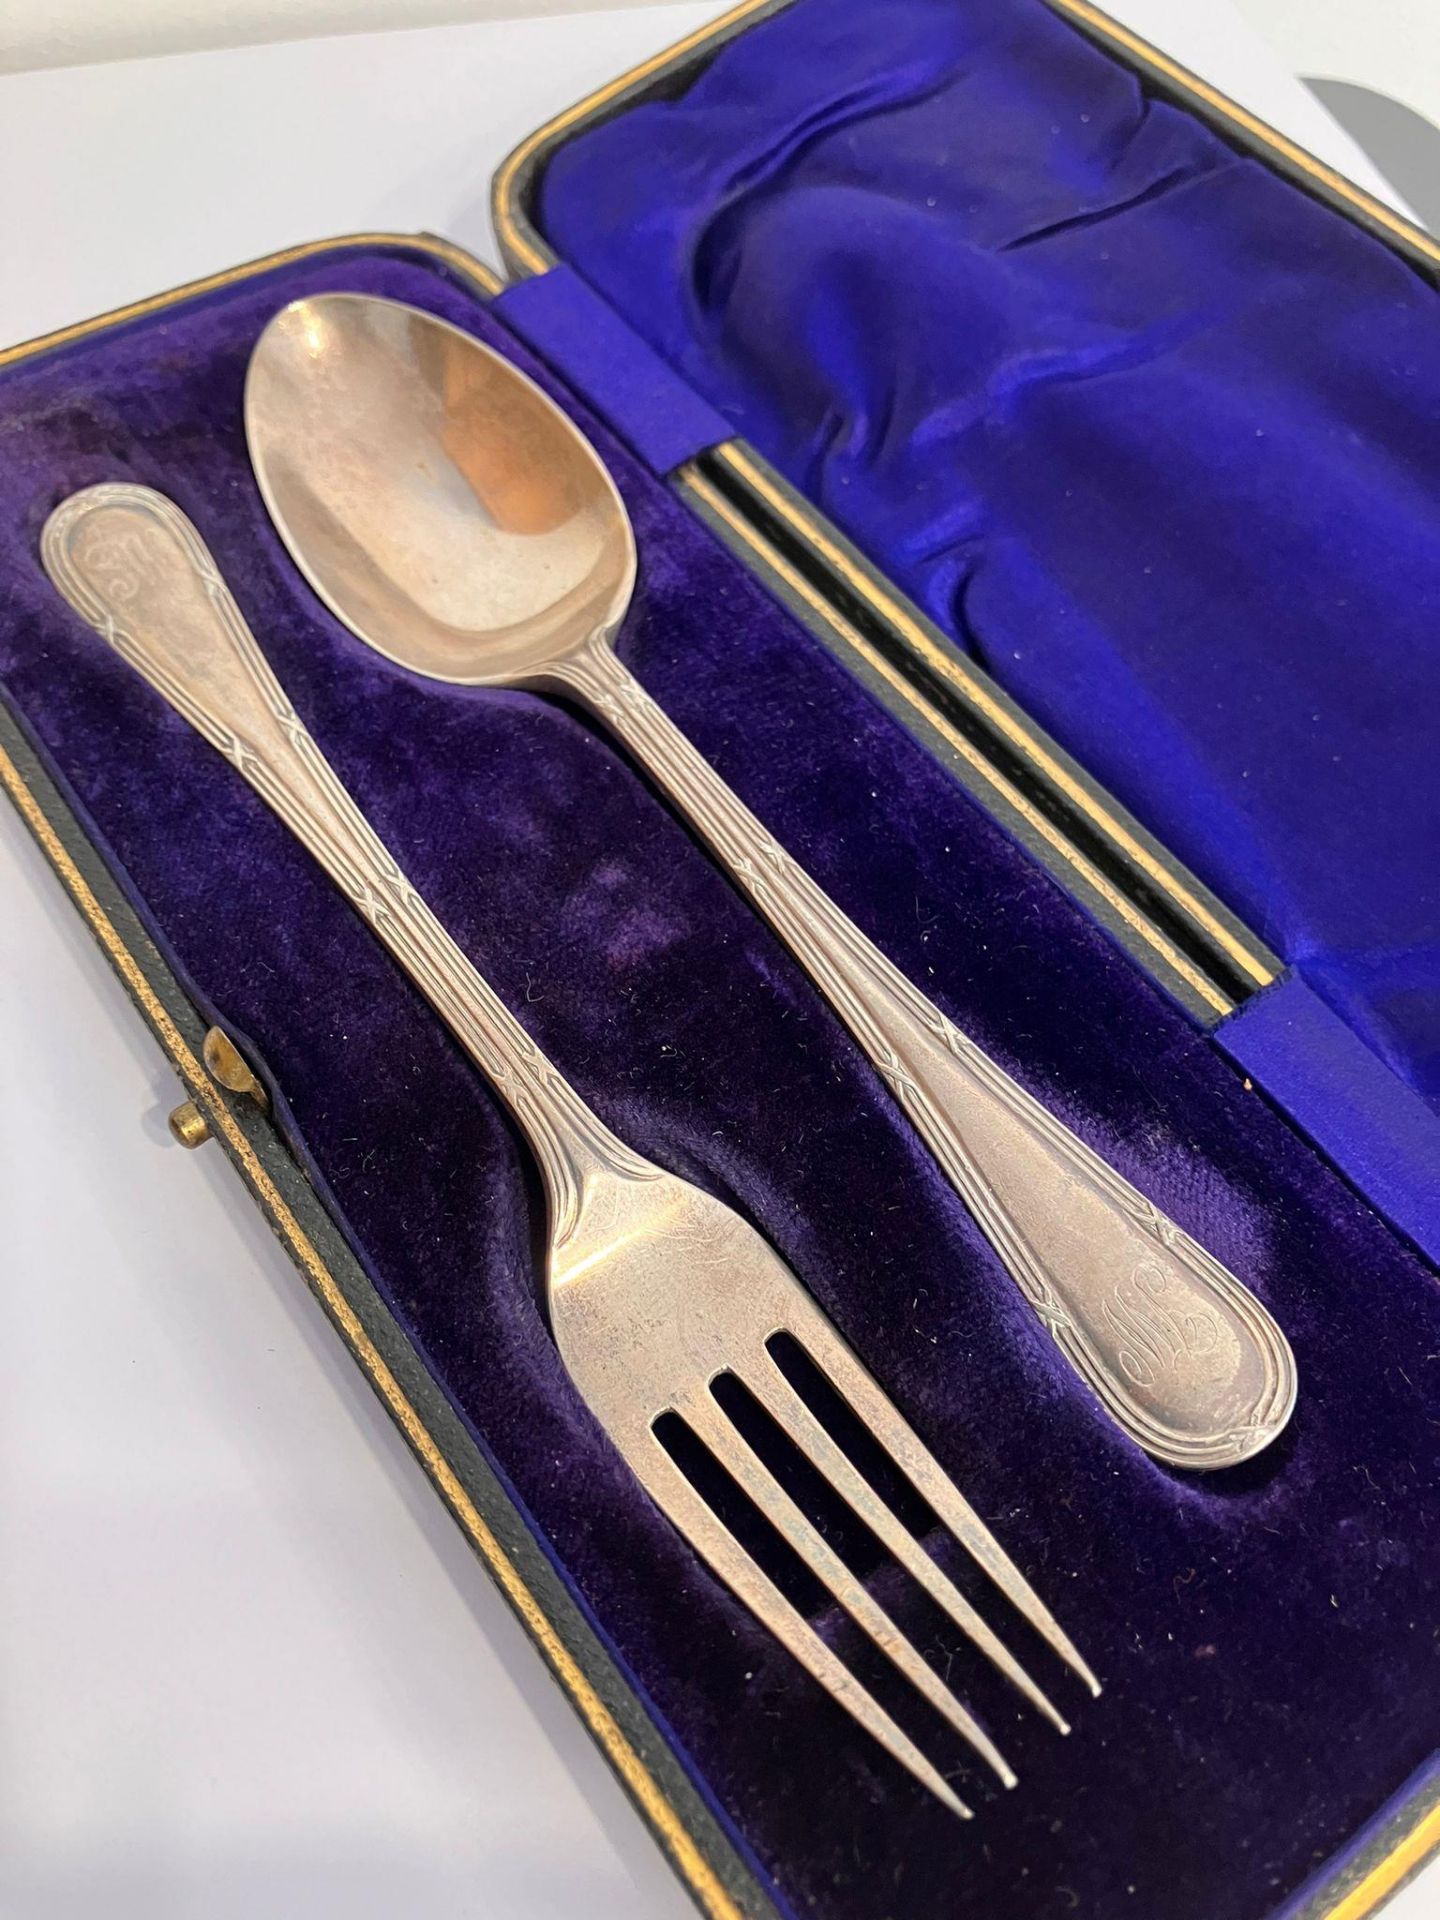 Antique SILVER FORK and SPOON SET. Hallmark for William Hutton and Sons, Sheffield 1908. Presented